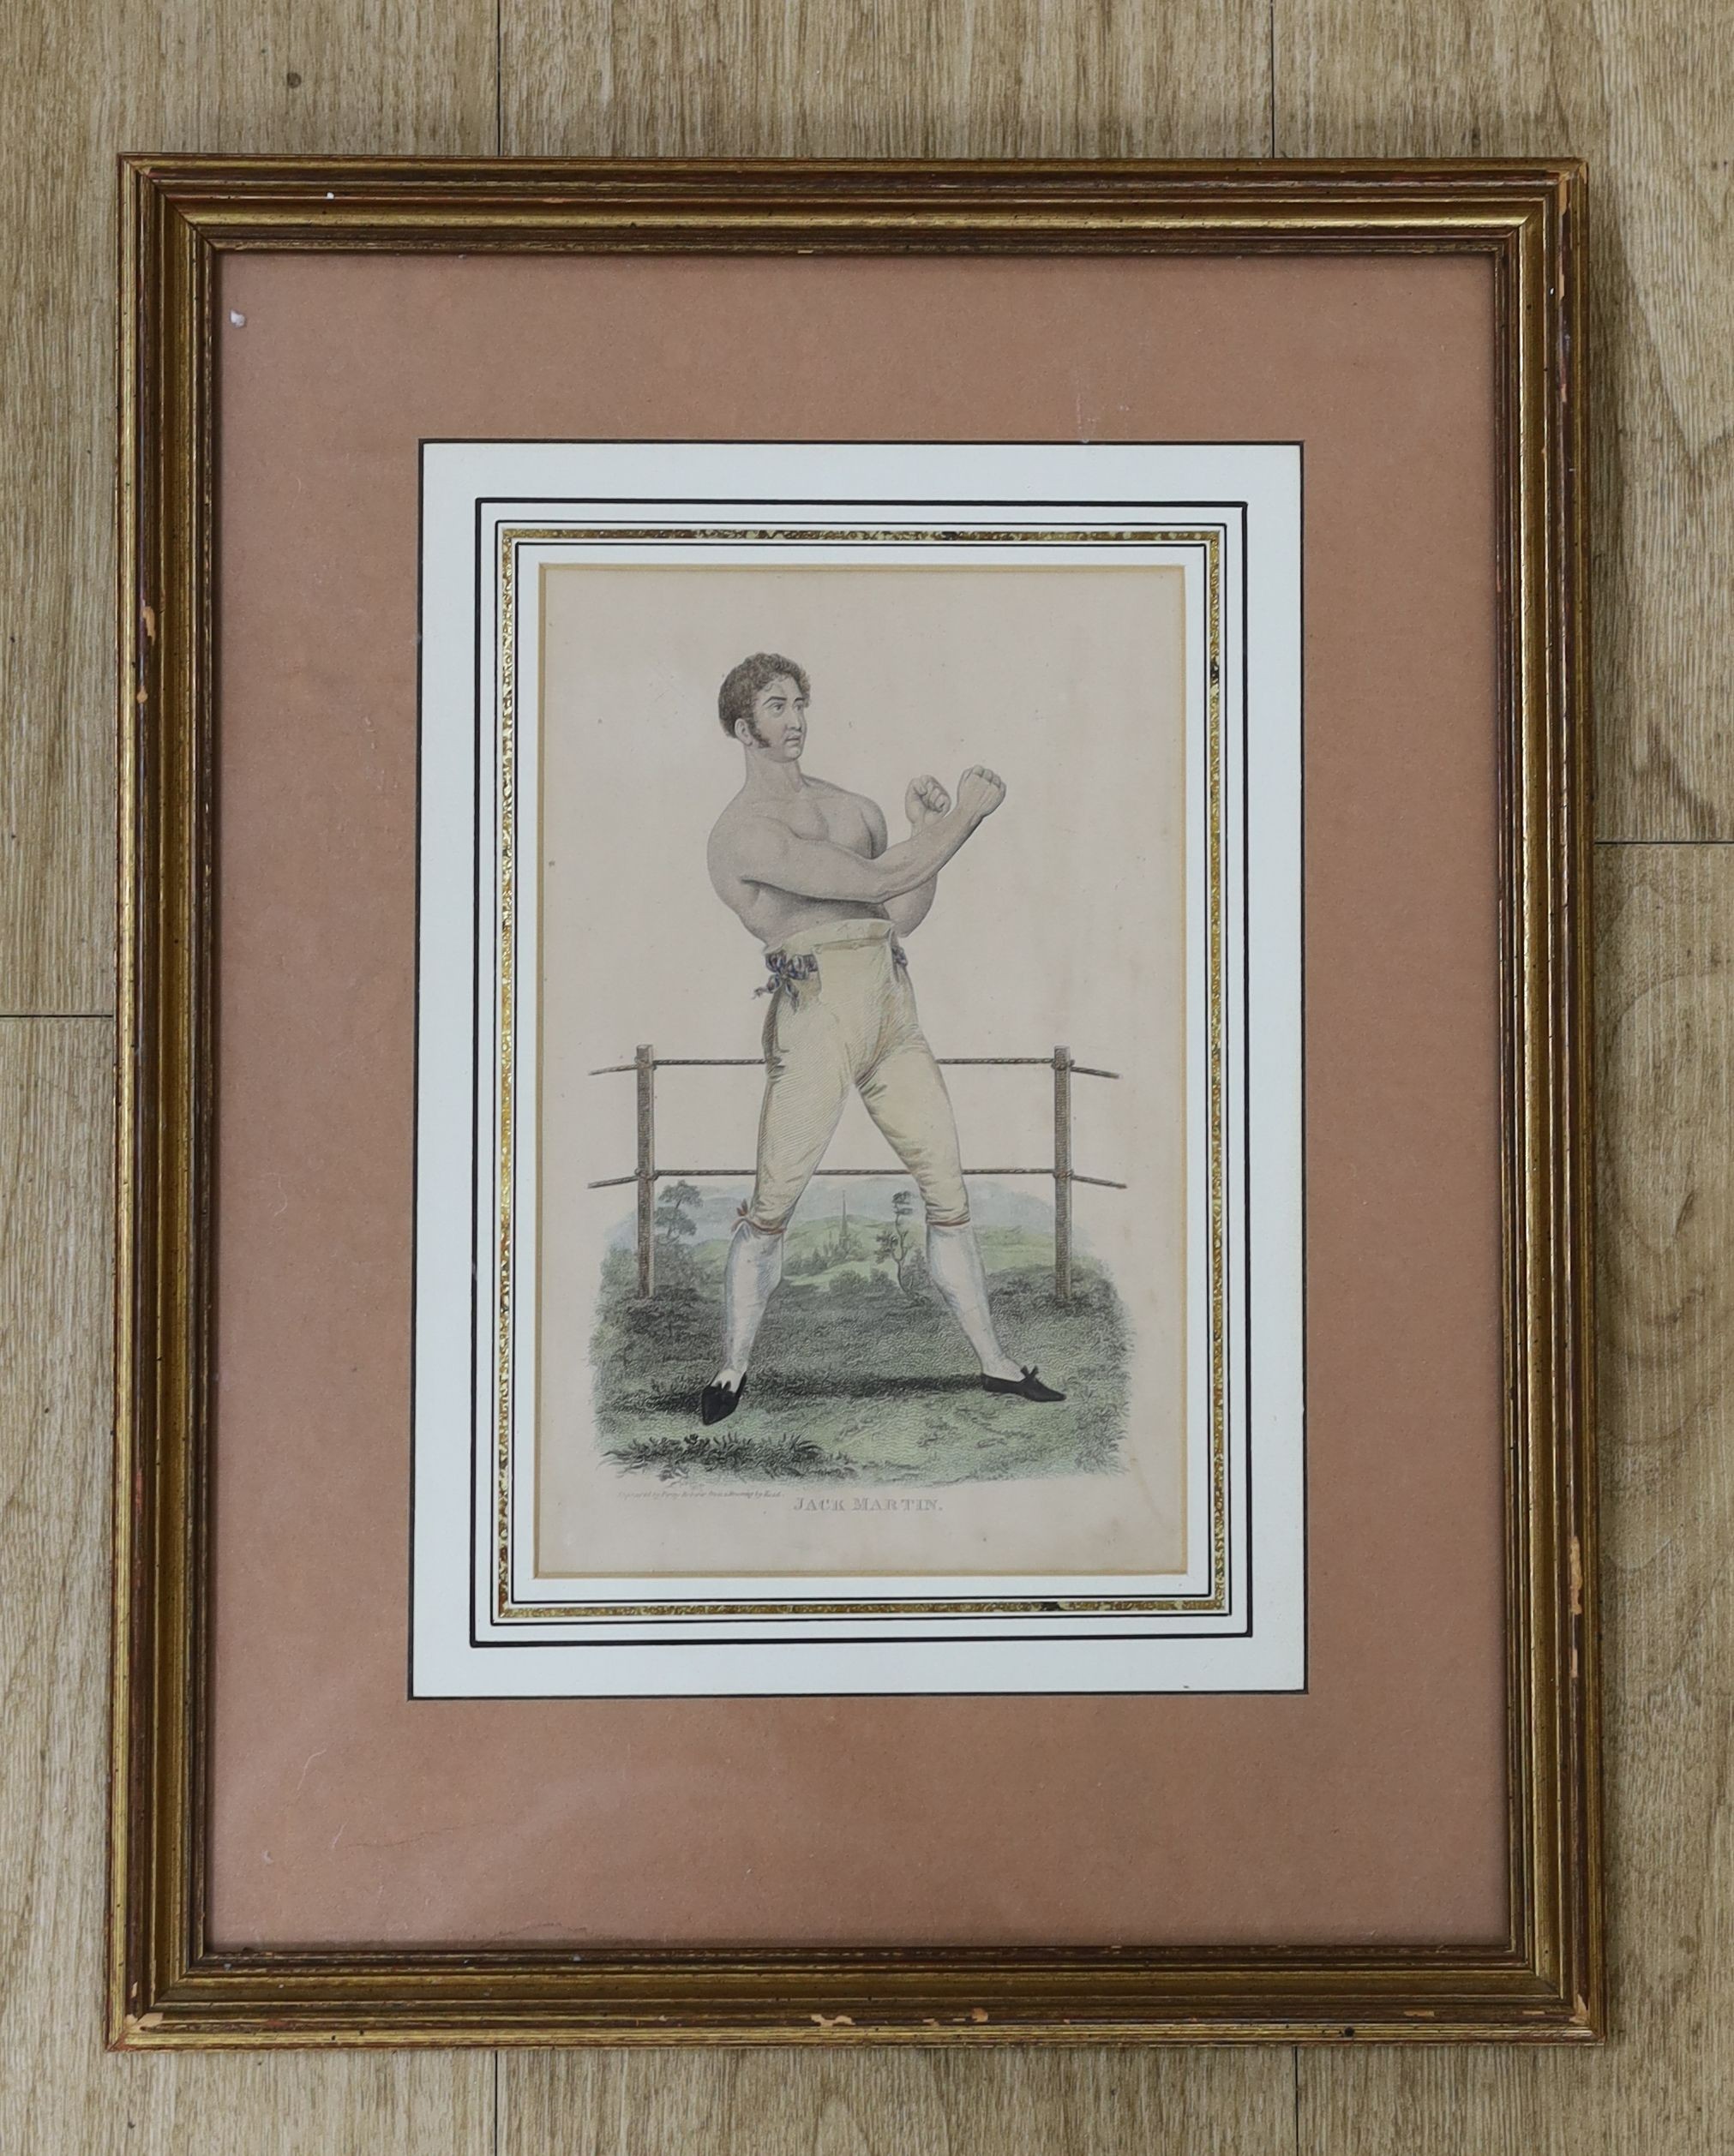 Percy Roberts, hand coloured engraving, Portrait of the the boxer, Jack Martin, 23 x 14.5cm